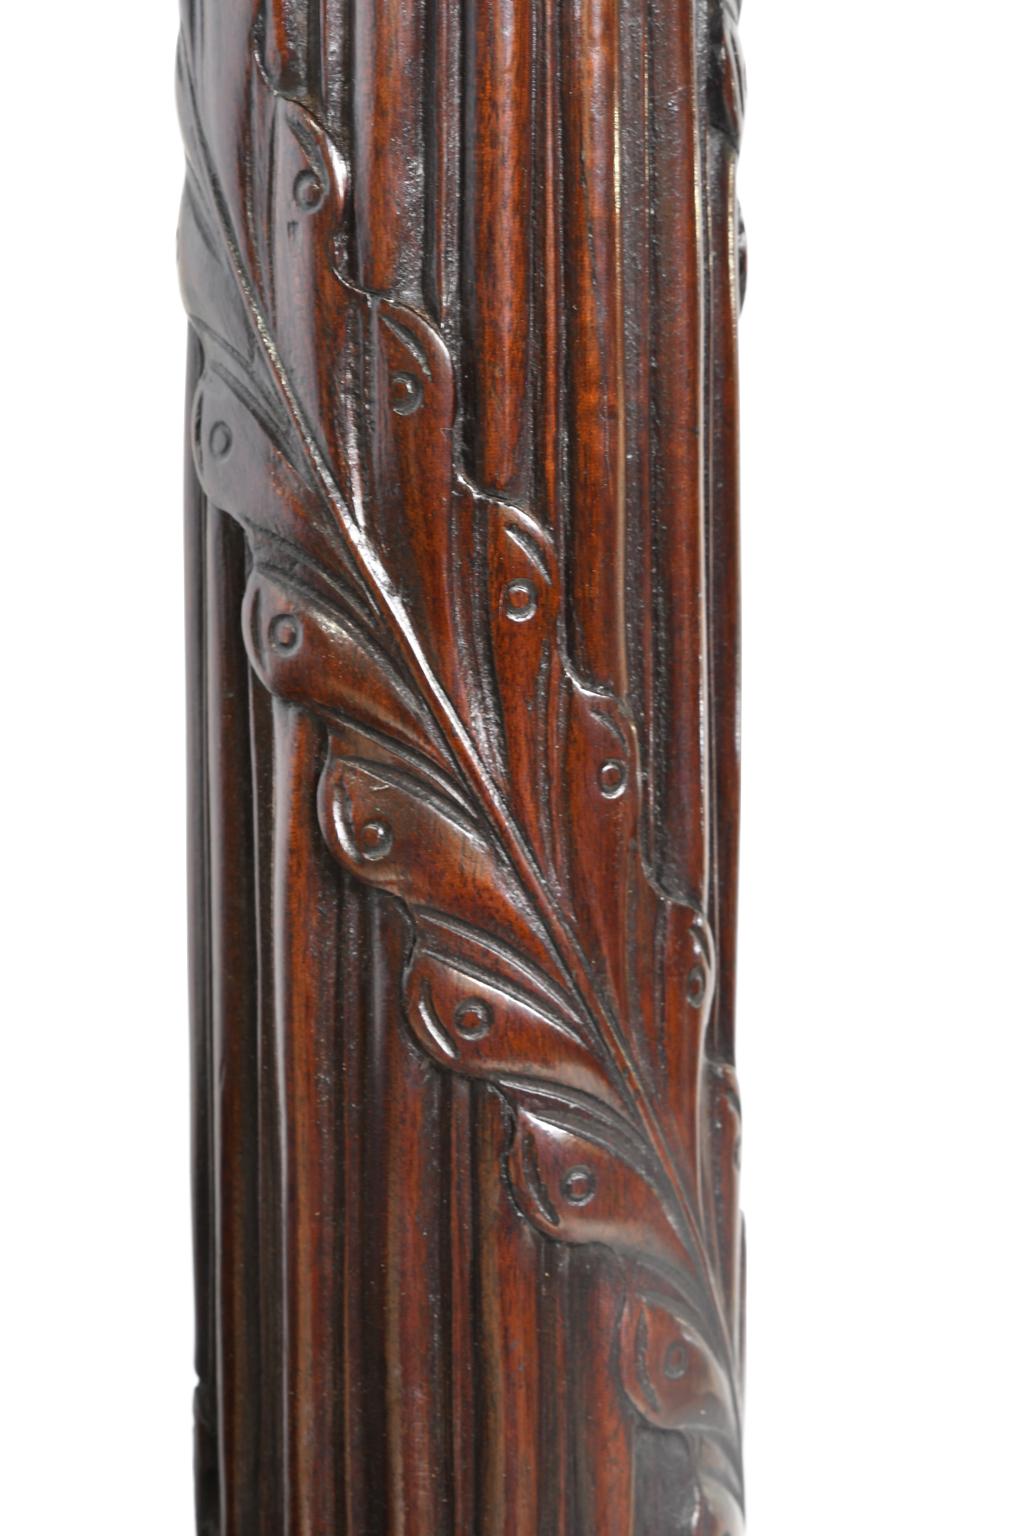 NYC Federal Full Tester Bed Attributable to Lannuier w Four Floral-Carved Posts For Sale 2